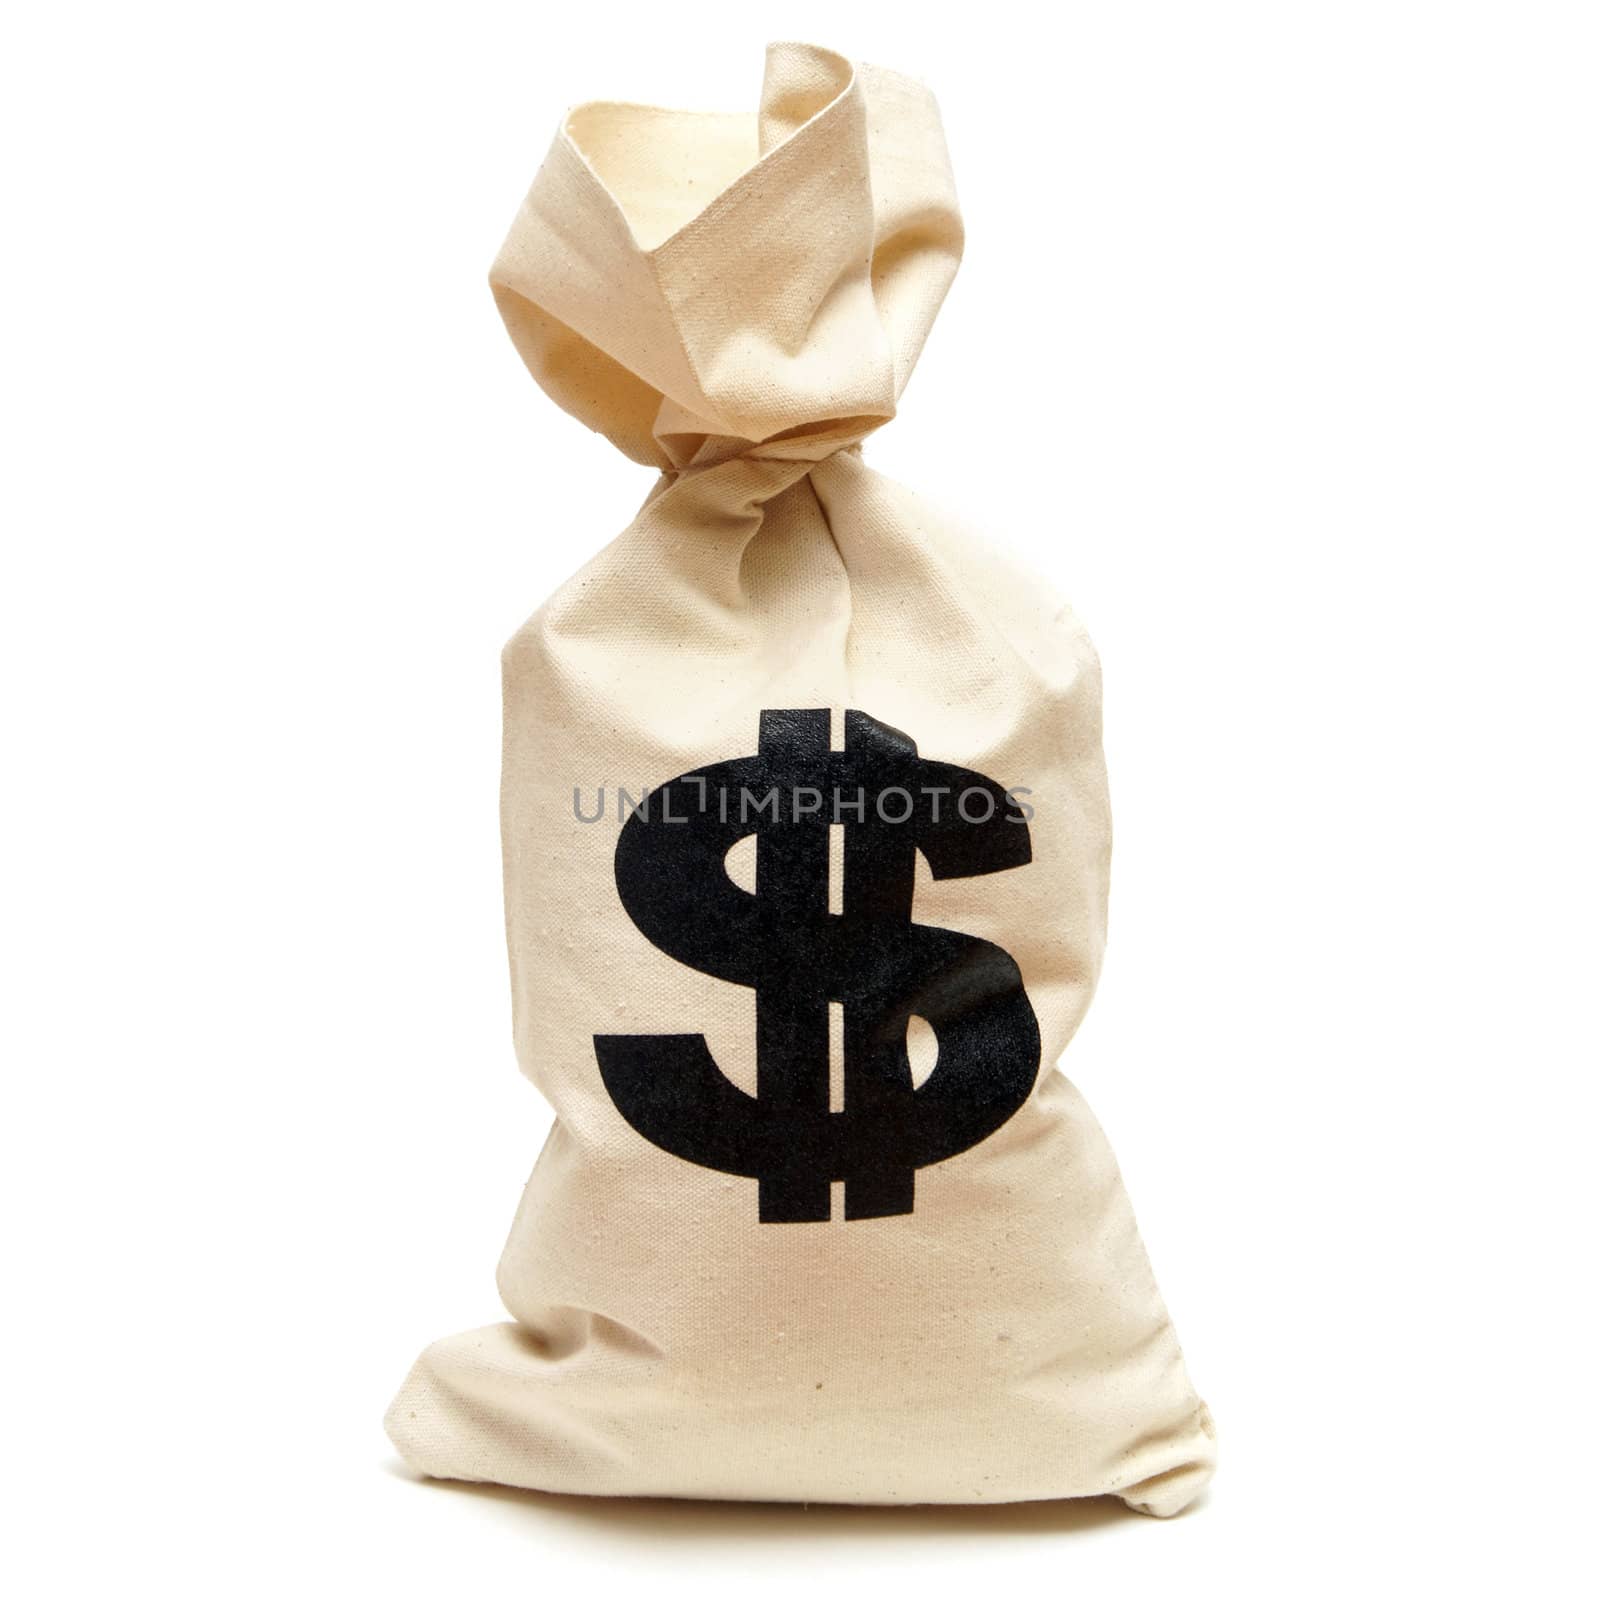 An isolated shot of a bag of money with the dollar symbol stamped on it.